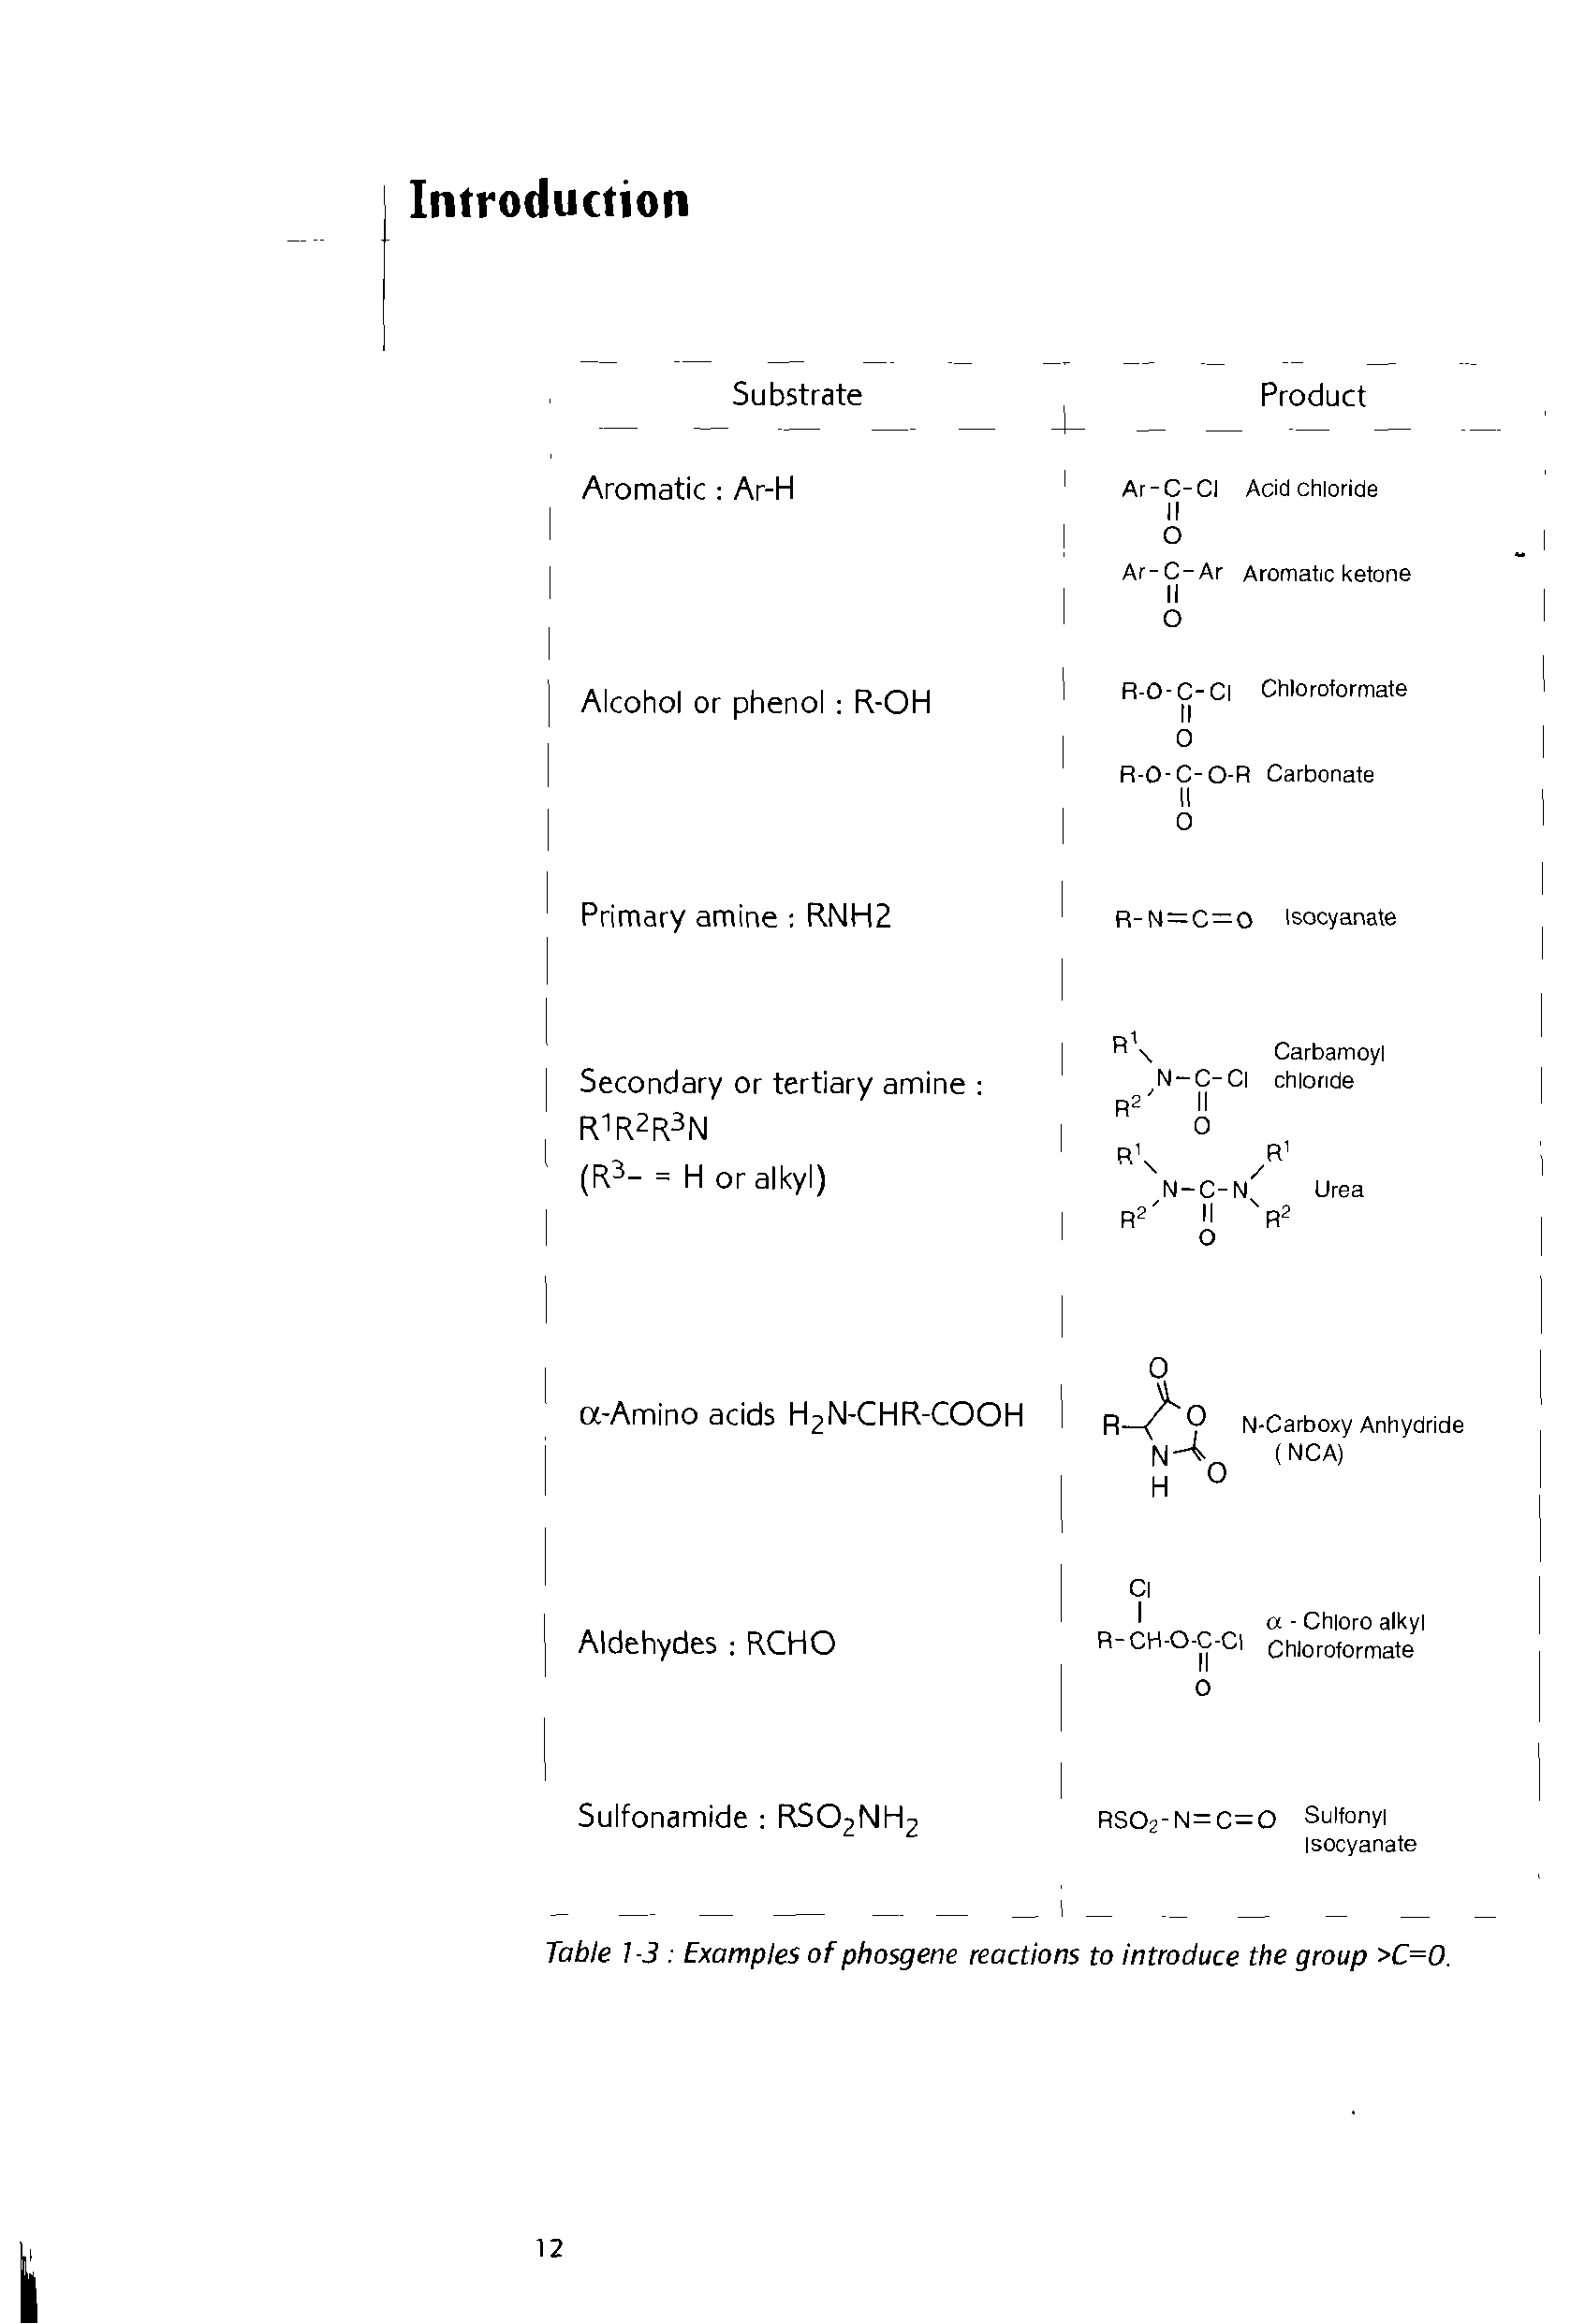 Table 1-3 Examples of phosgene reactions to introduce the group >C=0.